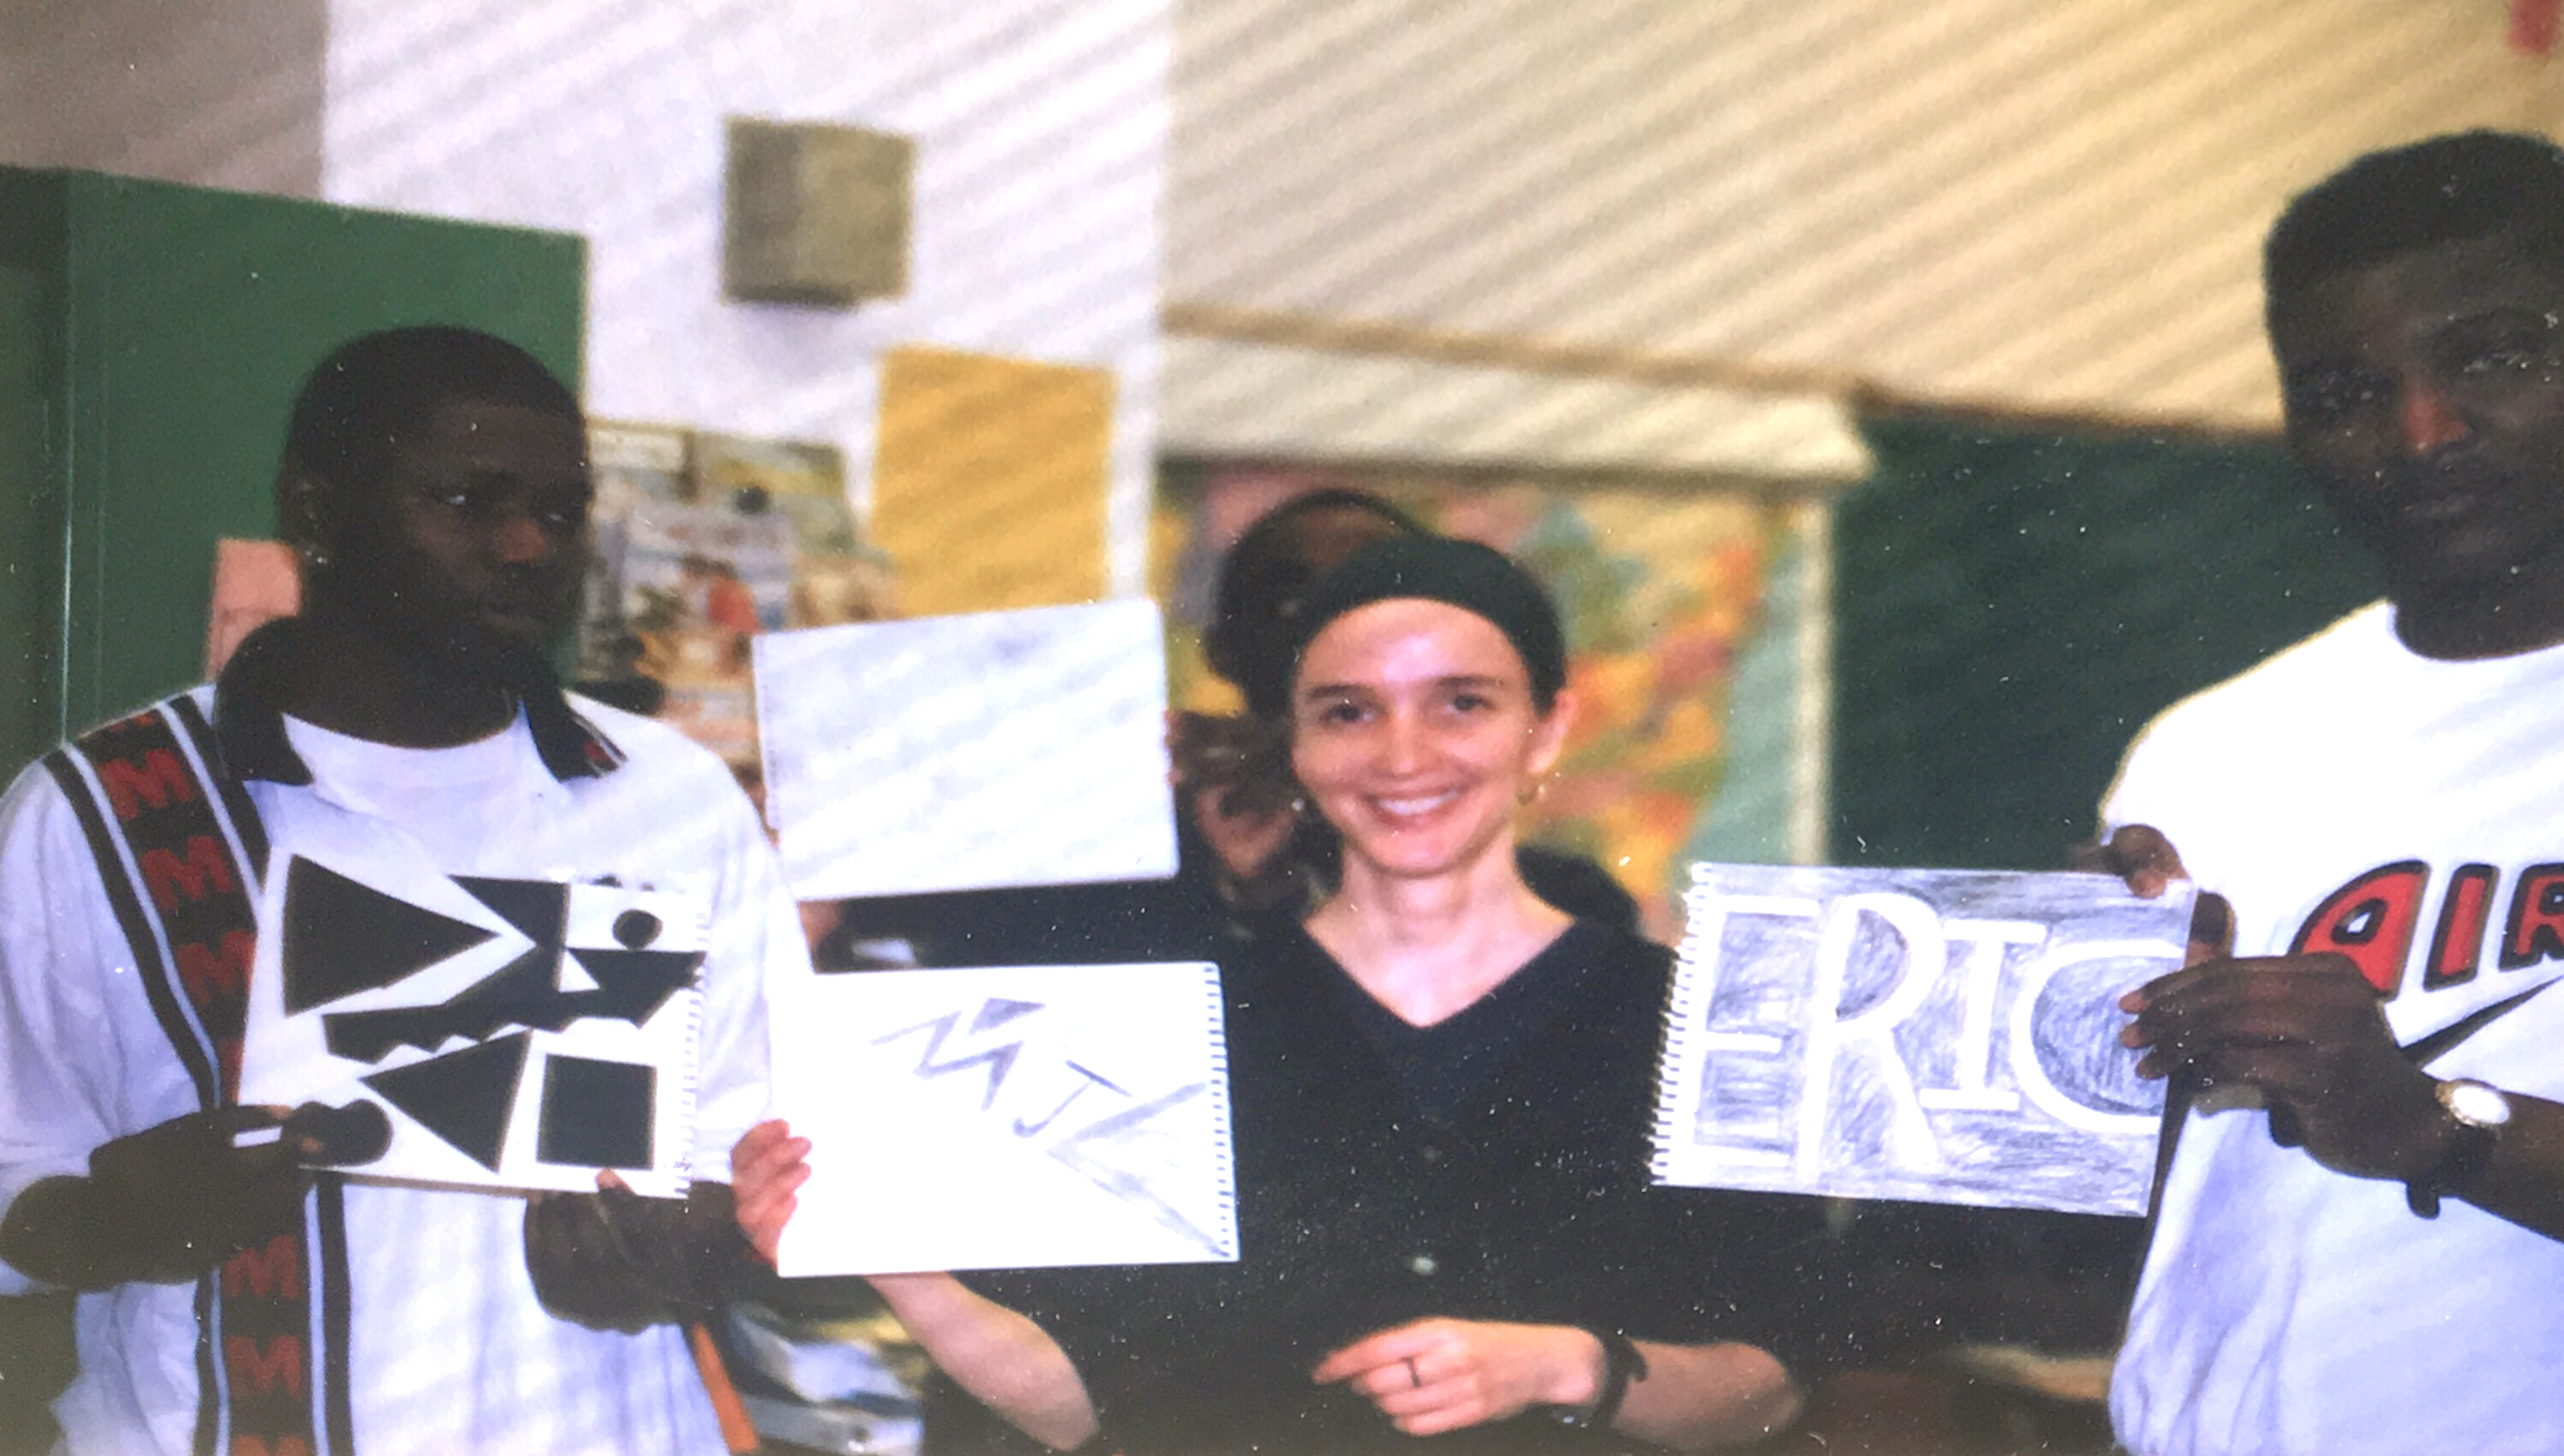 Molly with students holding art for picture books.